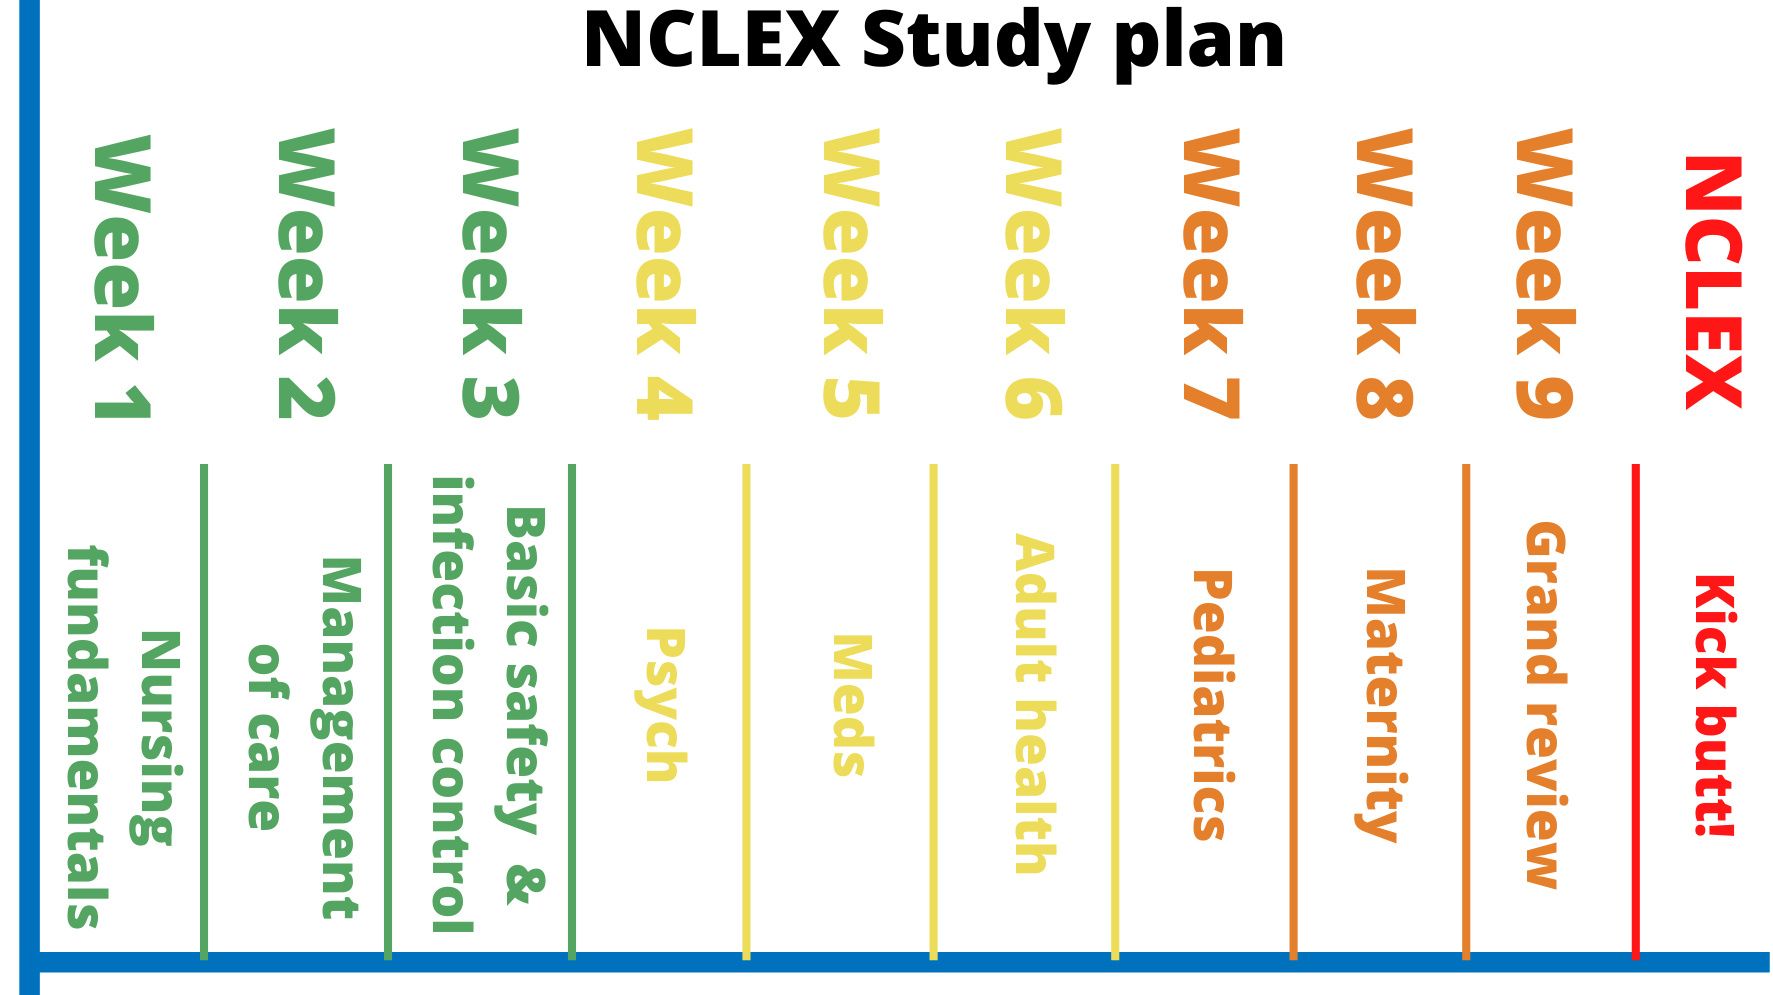 Your NCLEX study plan by Brainscape